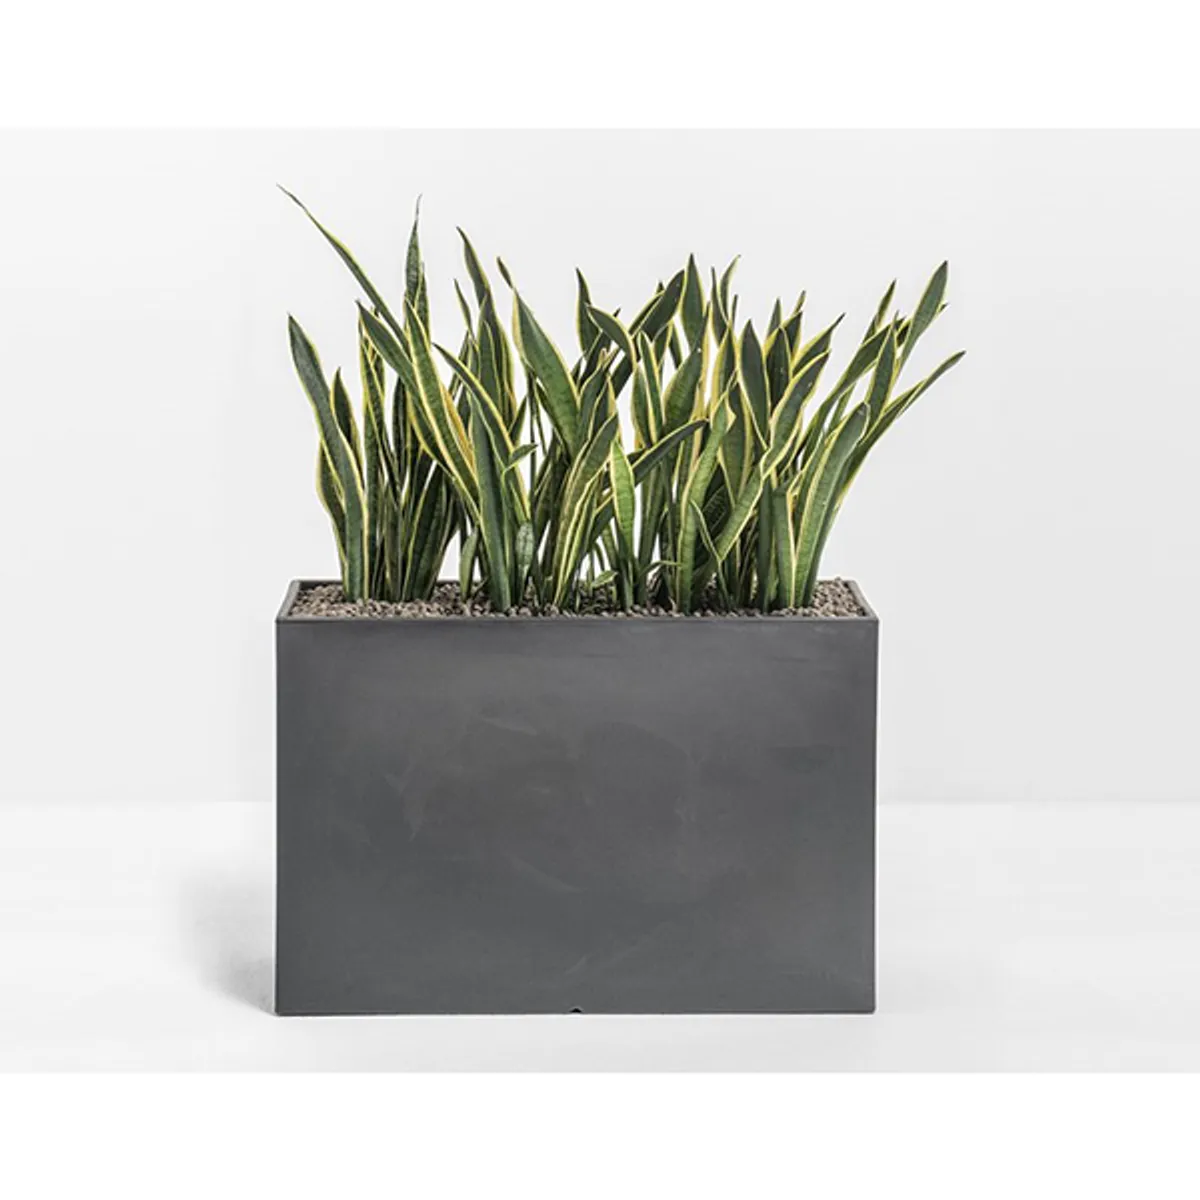 Kado Planter Tall Inside Out Contracts